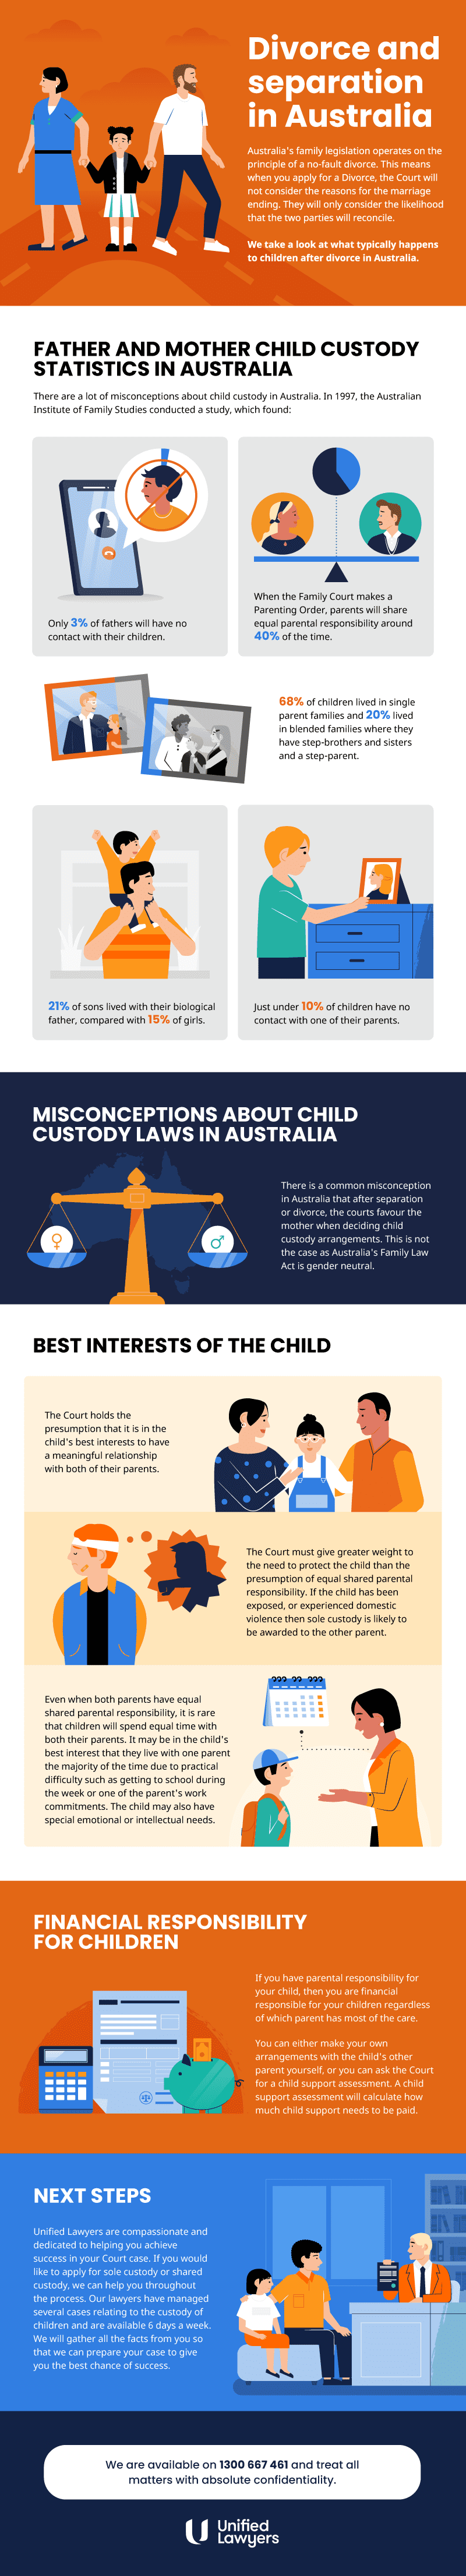 Father and mother child custody statistics infographic